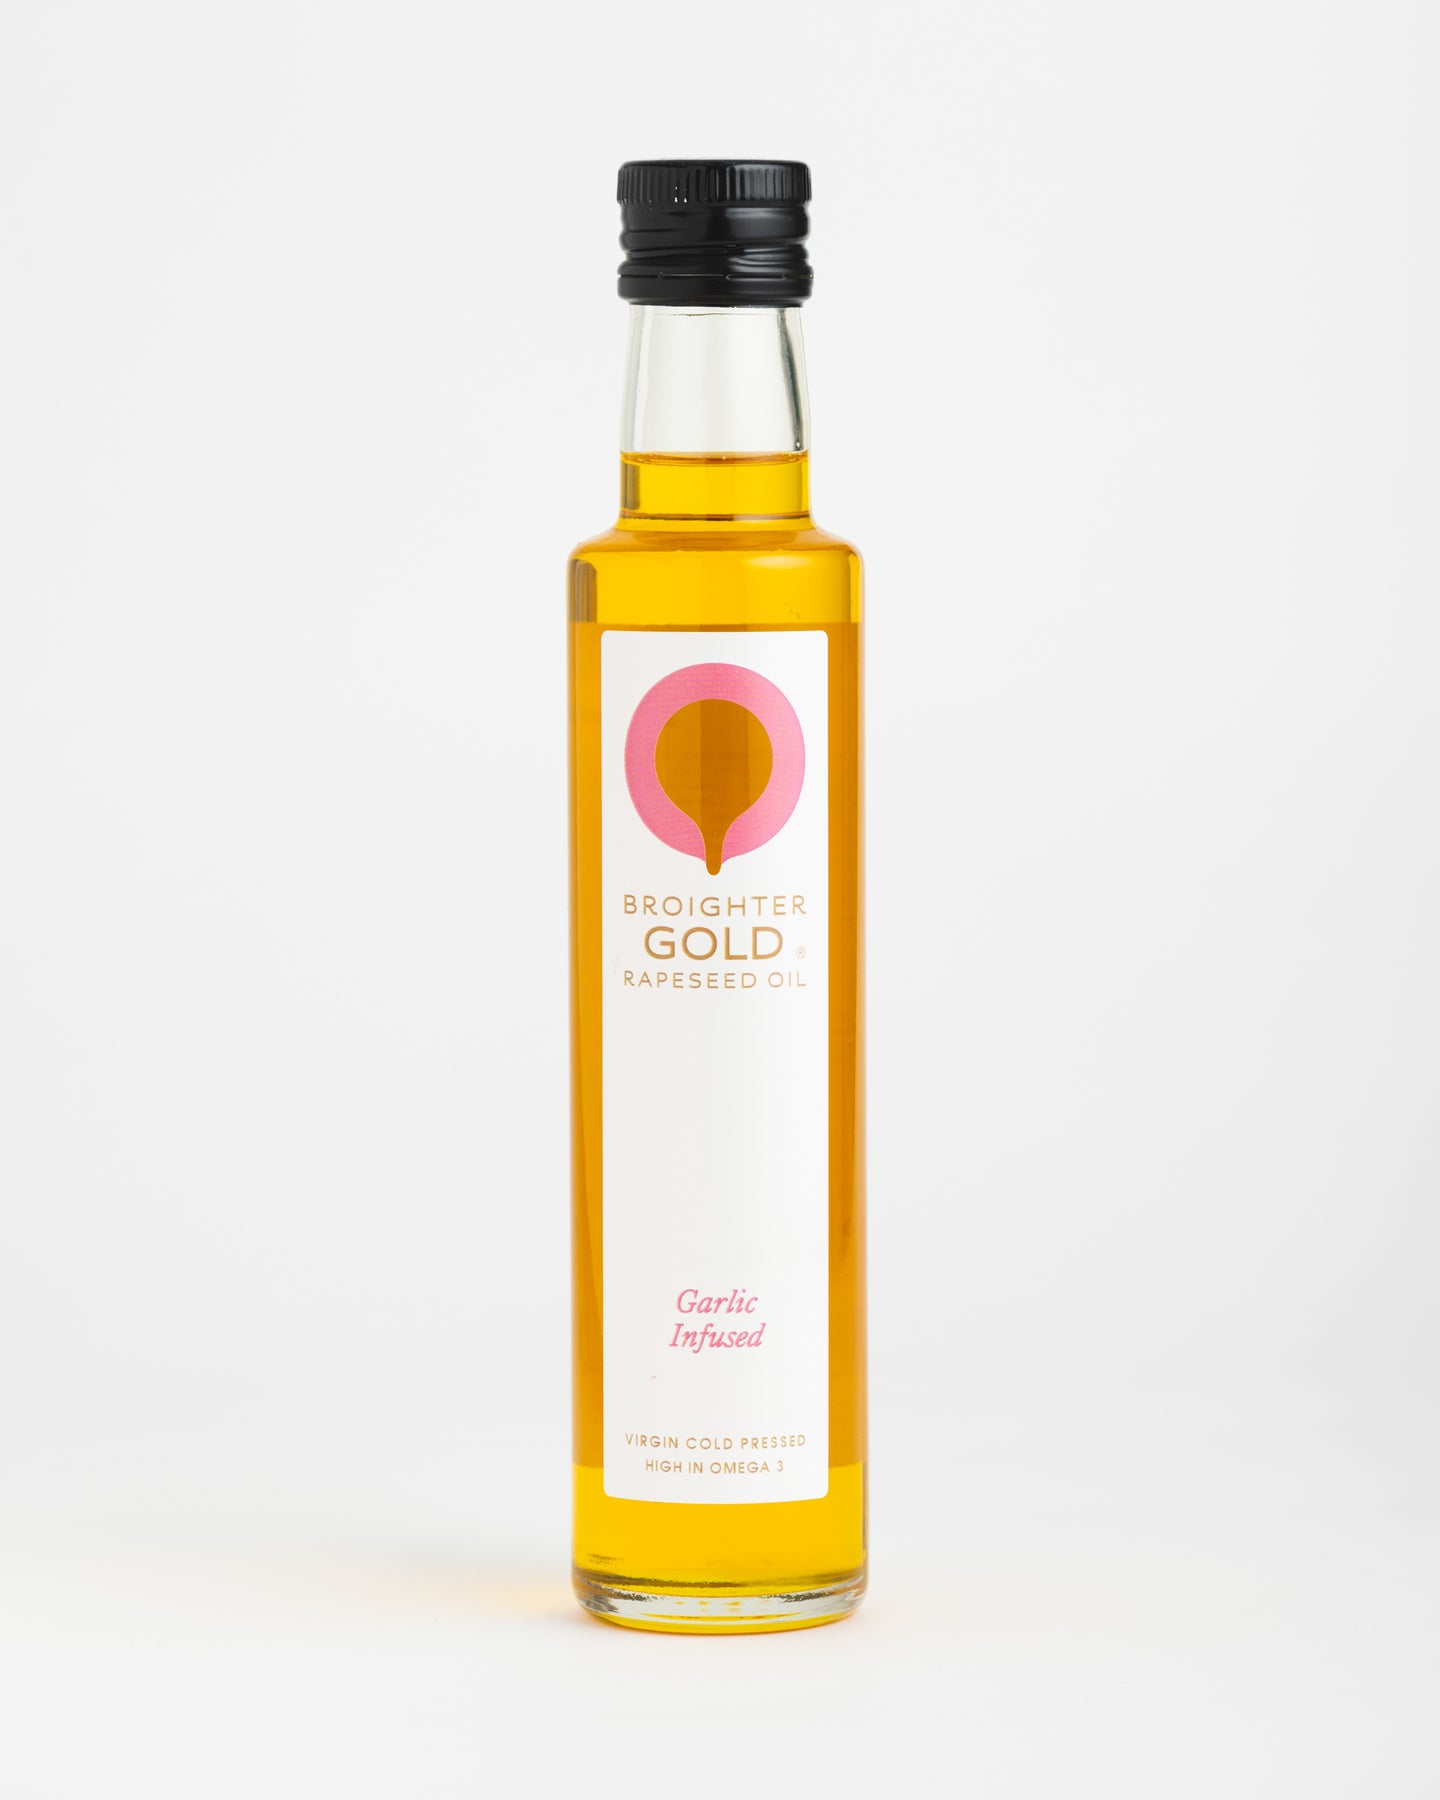 Broighter Gold - Garlic Infused Rapeseed Oil